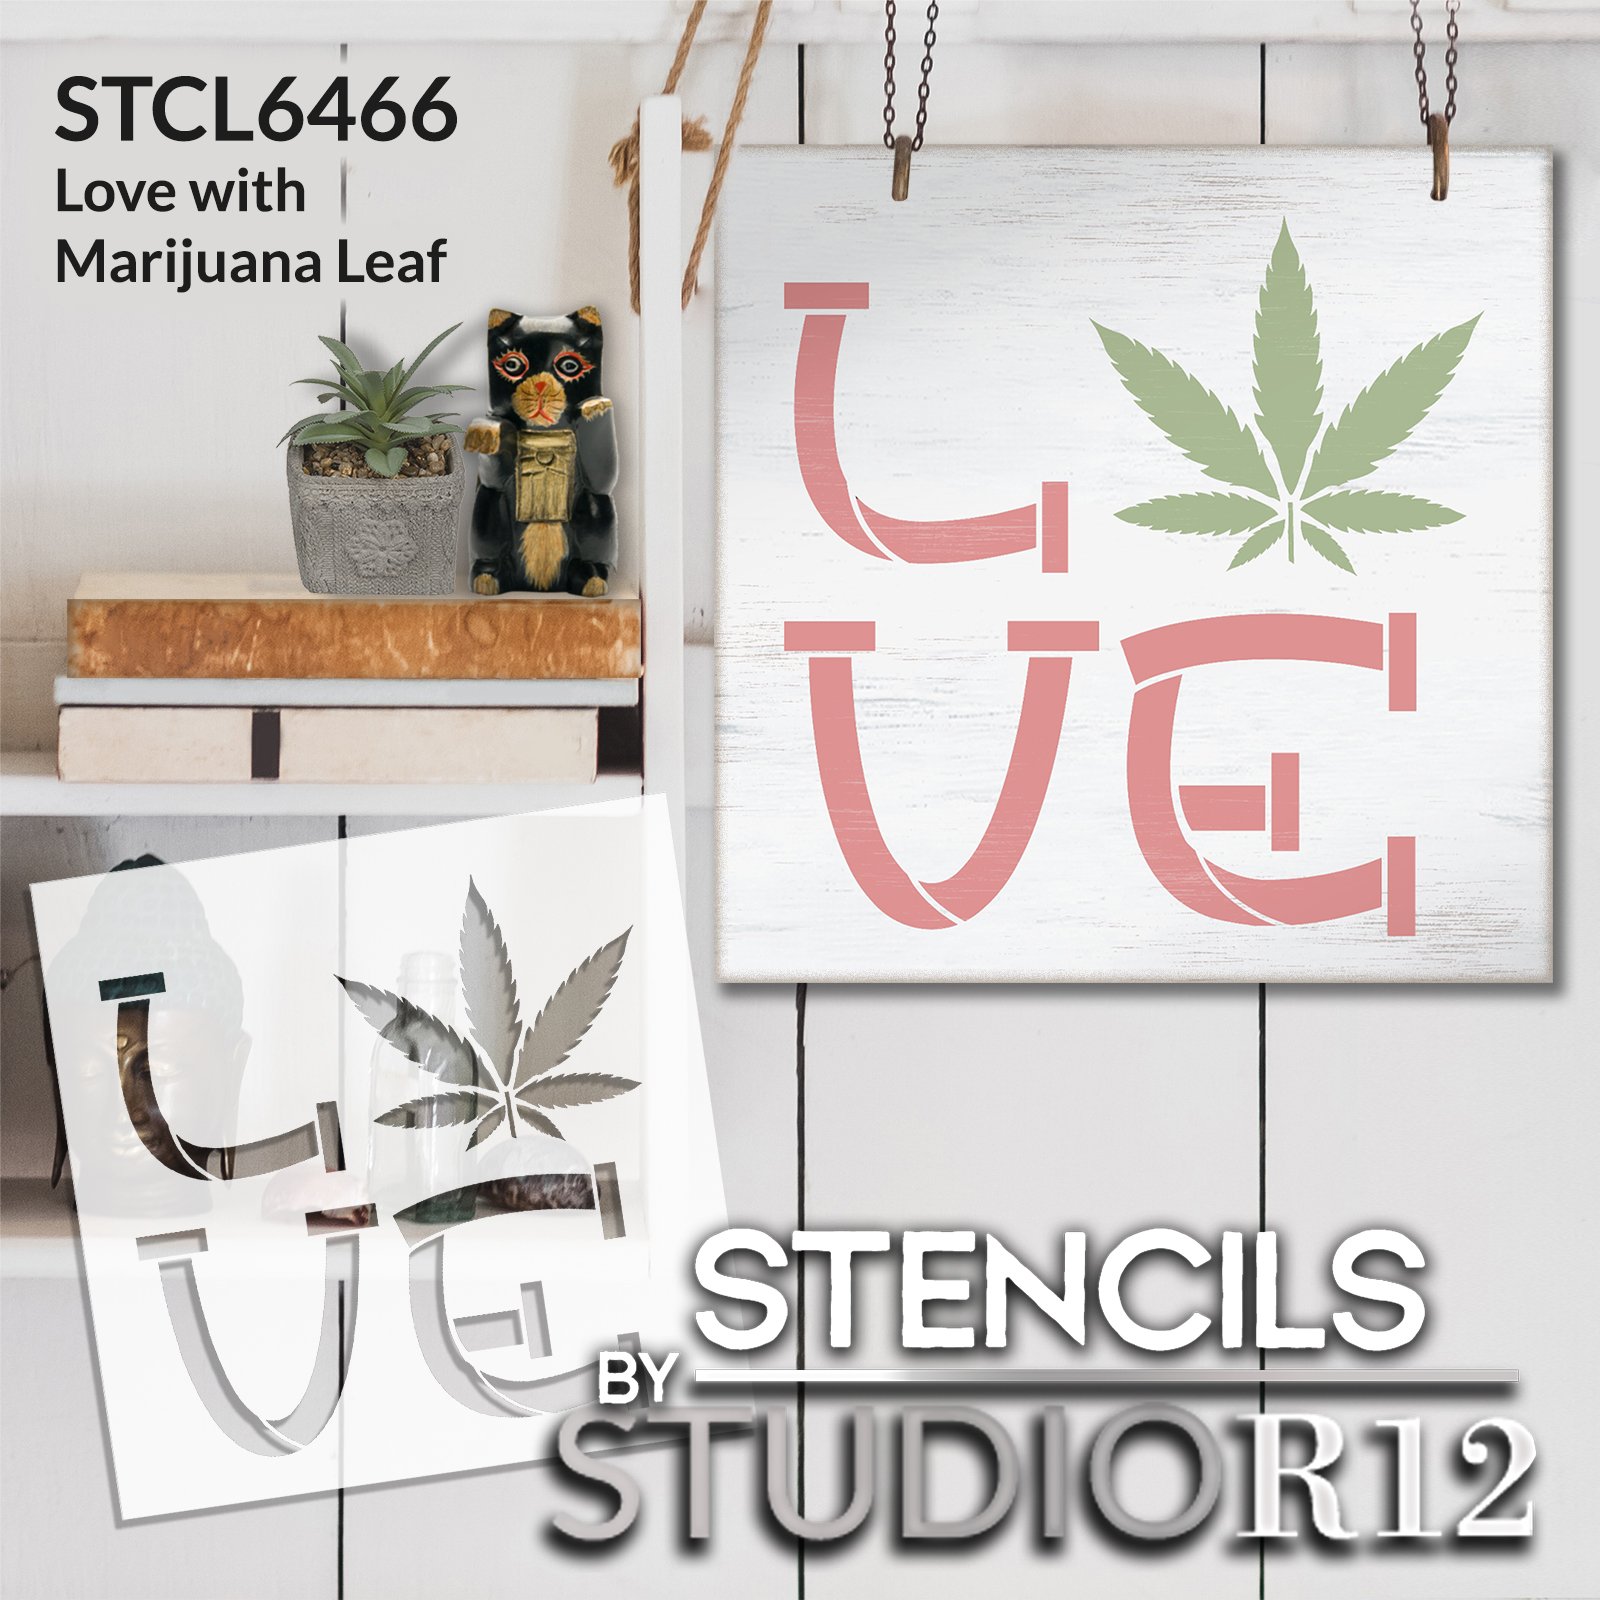 Love with Marijuana Leaf 420 Stencil by StudioR12 | Pot Plant Mary Jane Getting High | Craft DIY Weed Smoker Decor | Paint Wood Sign | Select Size